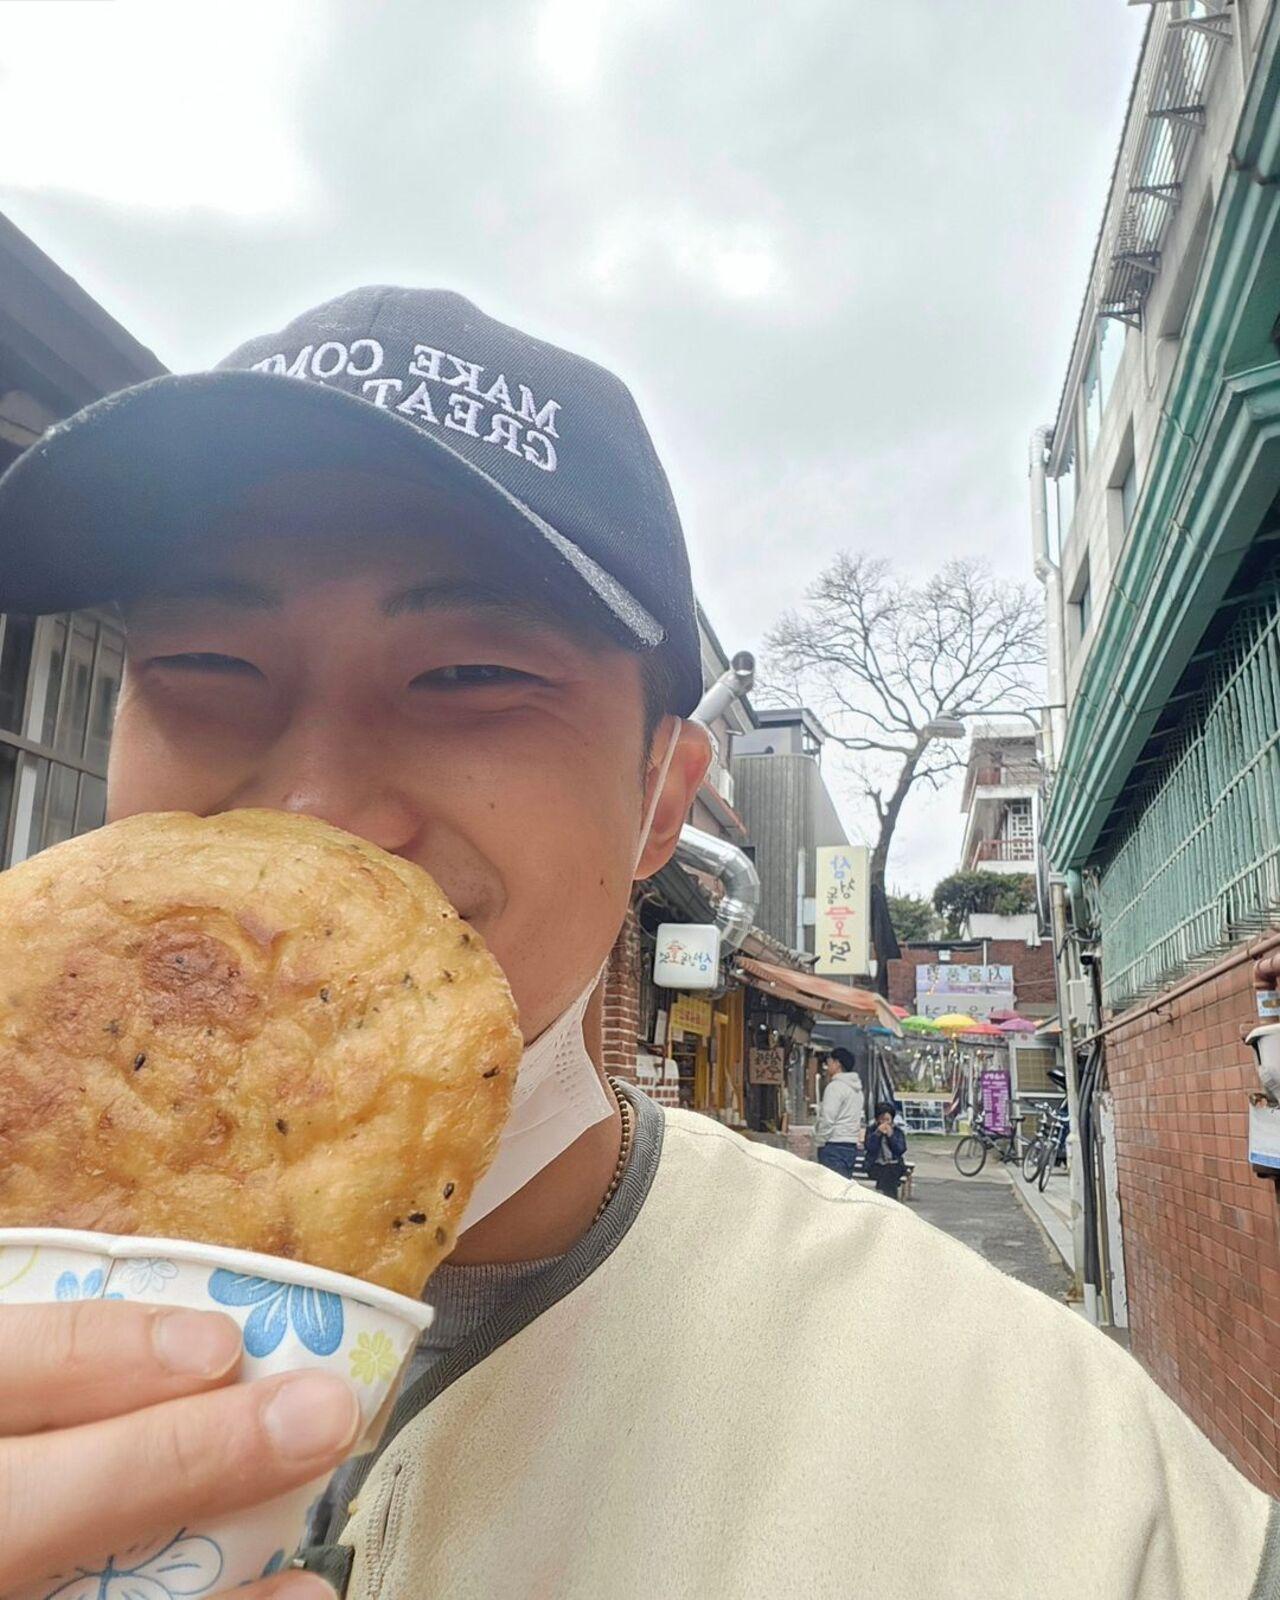 RM also treated himself with some hotteok a type of filled pancake which is a popular street food in South Korea. 